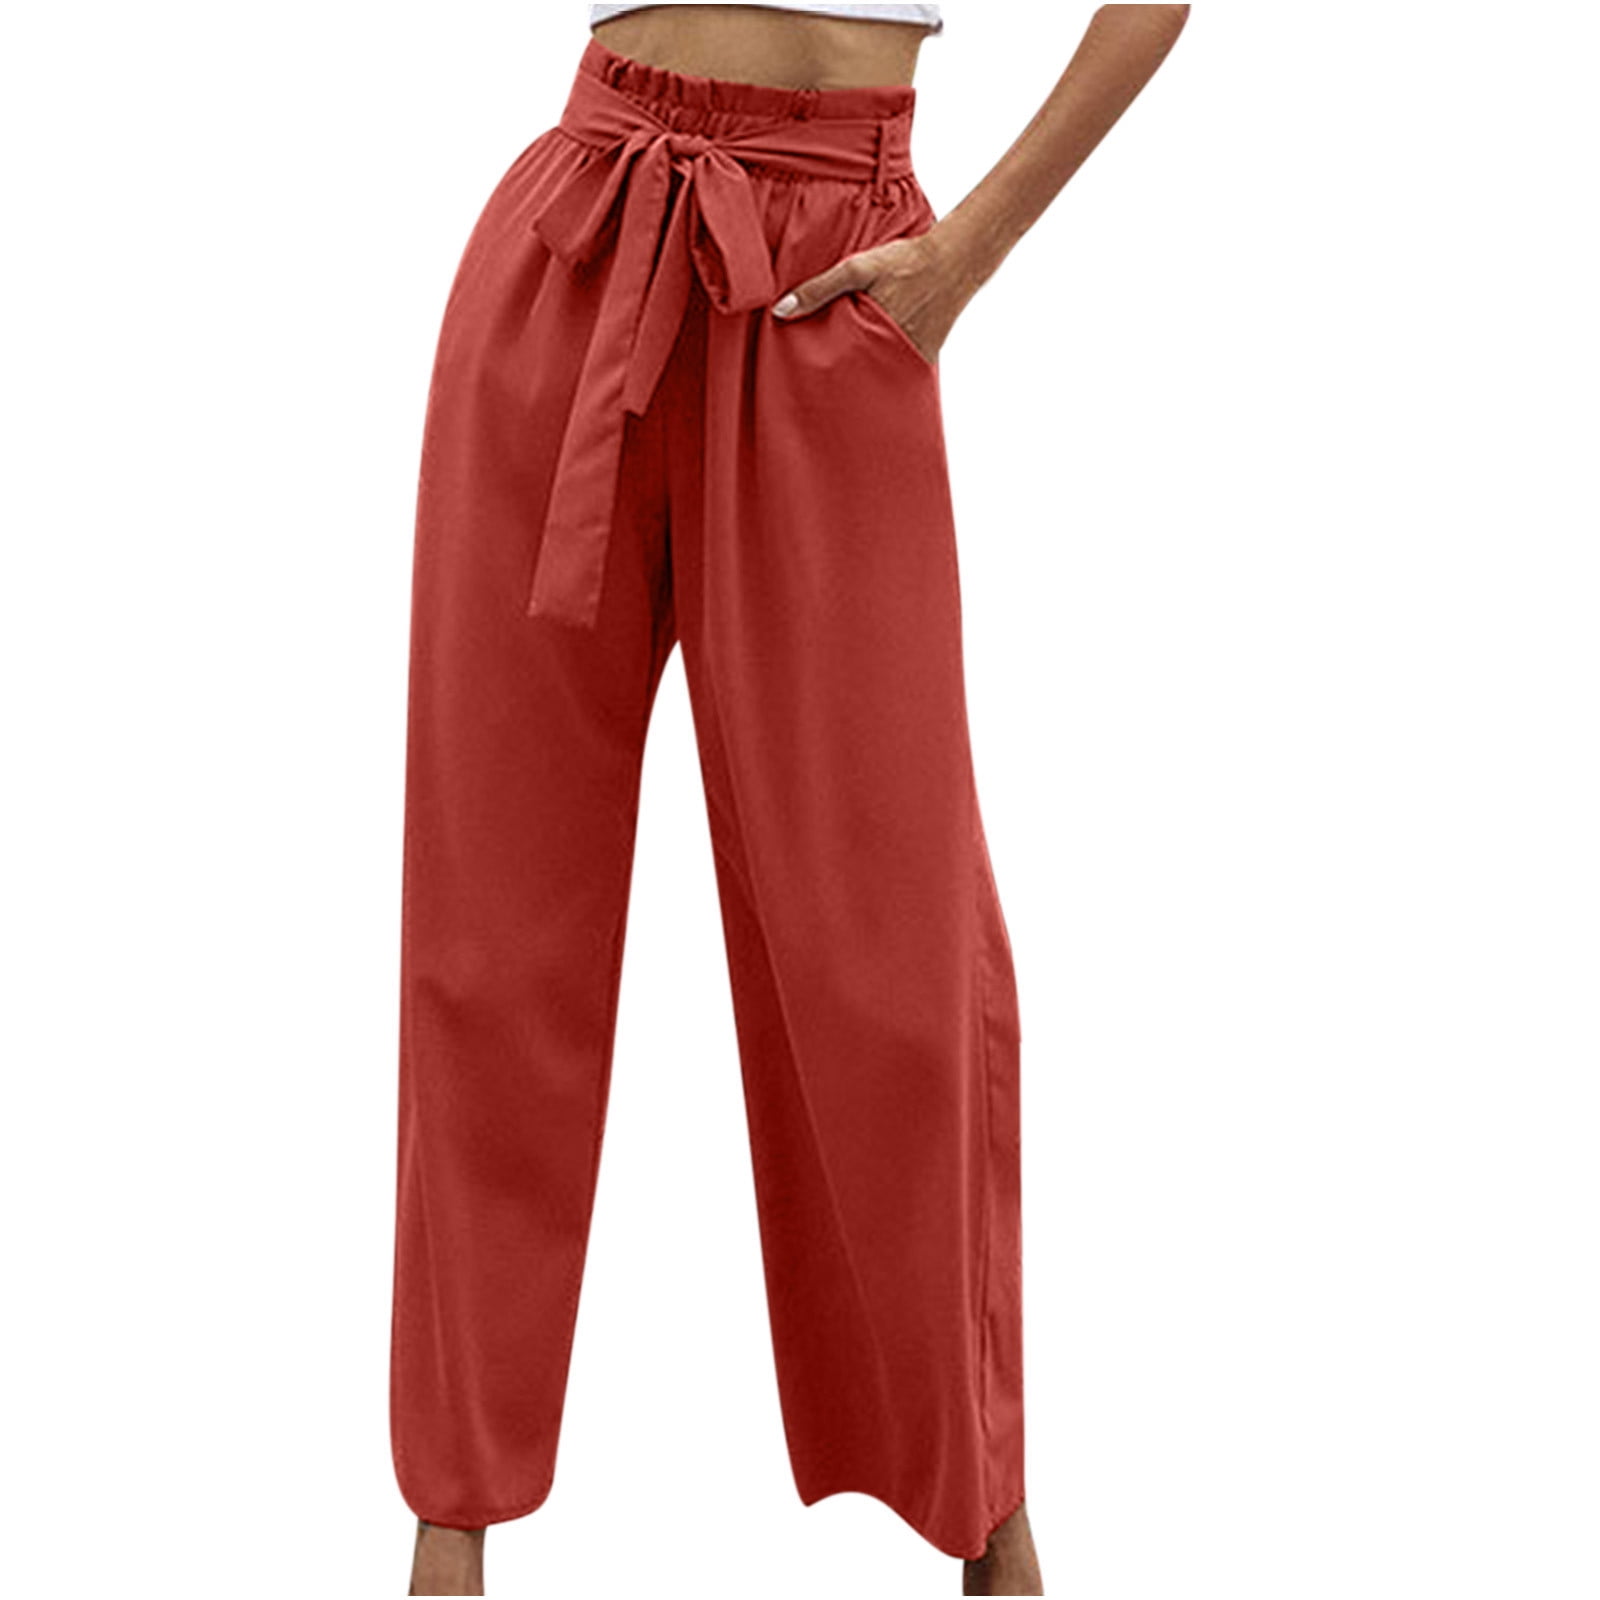 Zodggu Women Fashion Bottoms Women Comfortable Printed Color Drawstring  Leisure Pants Pockets Versatile Loose Trousers Loose Pants Relaxed Vacation